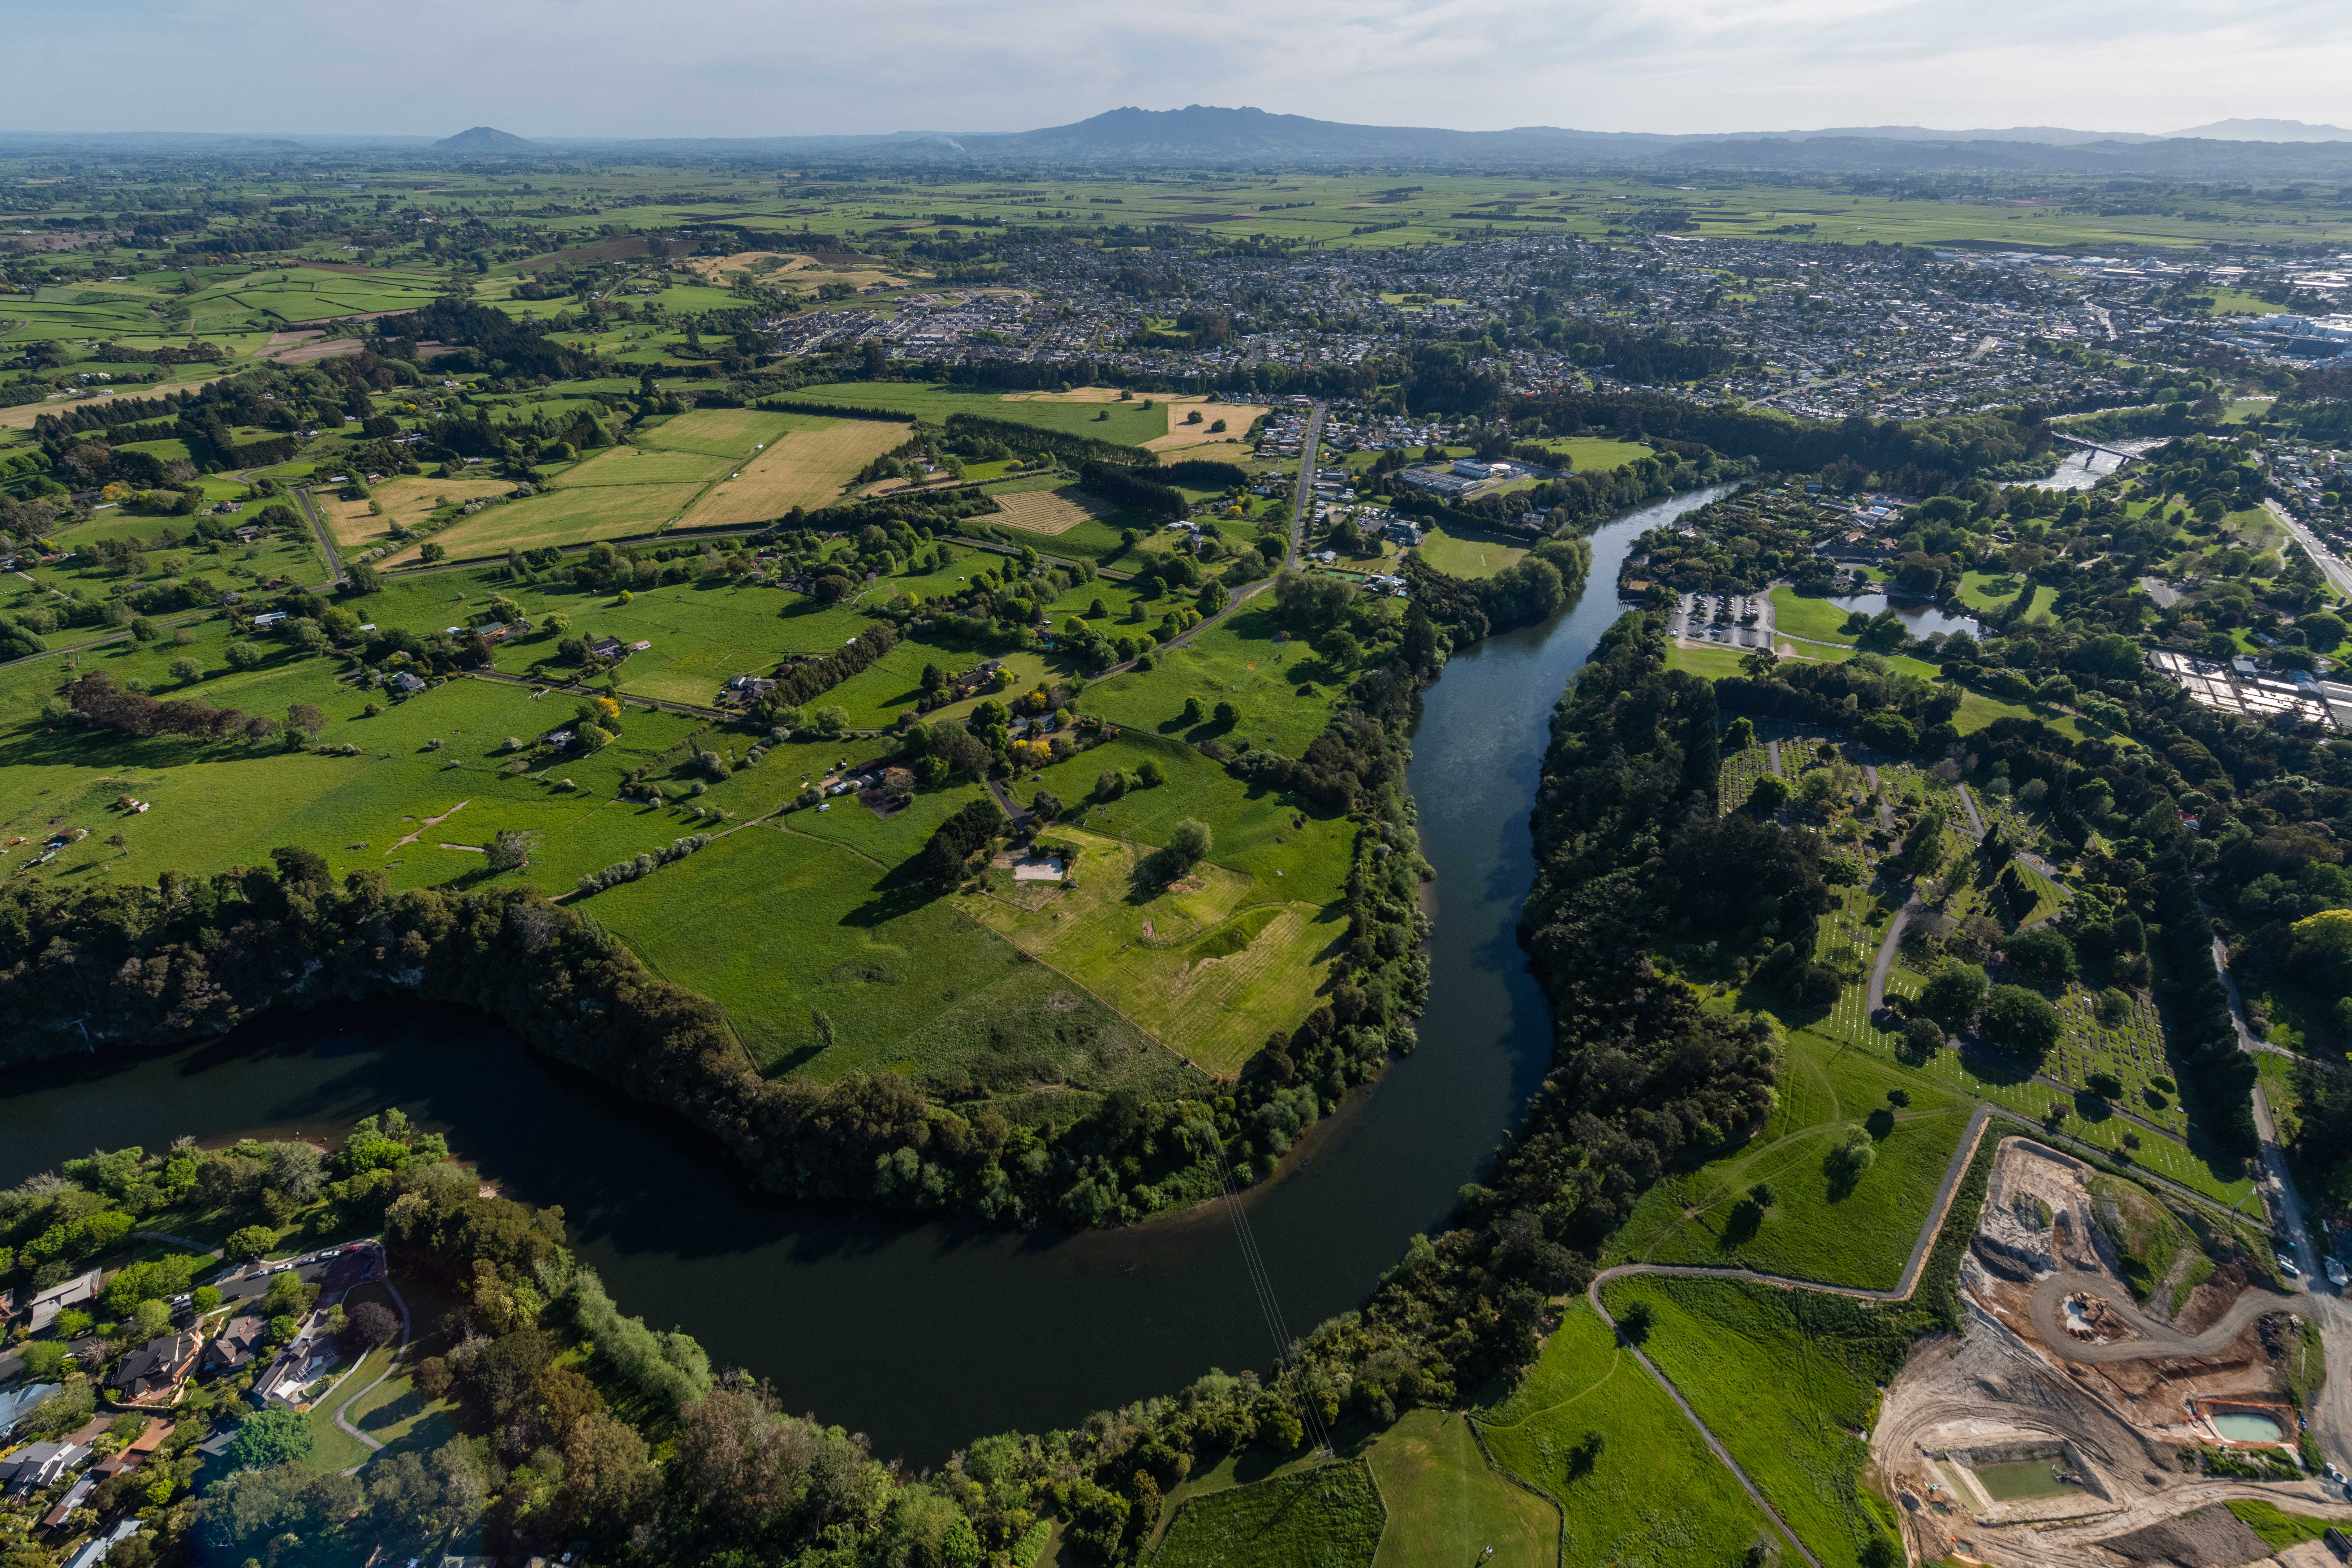 West-facing aerial view of Hamilton City with Waikato River and Hamilton Gardens in the foreground, and Mount Pirongia in the background